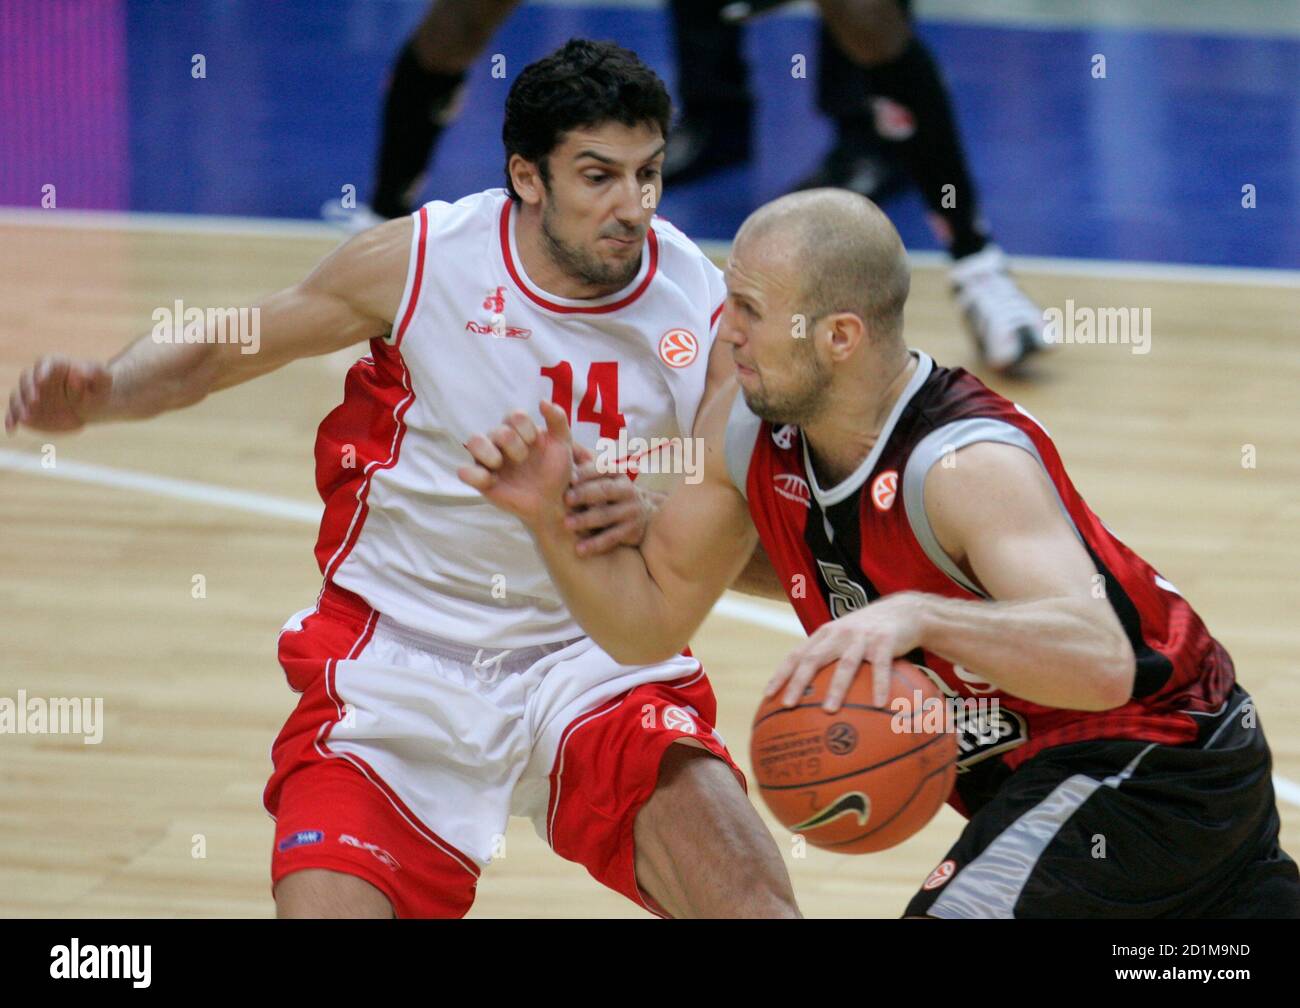 Dusan Vukcevic (L) of Armani Jeans Milano tries to stop Kenan Bajramovic of  Lietuvos Rytas during their Euroleague Group B men's basketball game in  Vilnius December 12, 2007. REUTERS/Ints Kalnins(LITHUANIA Stock Photo -